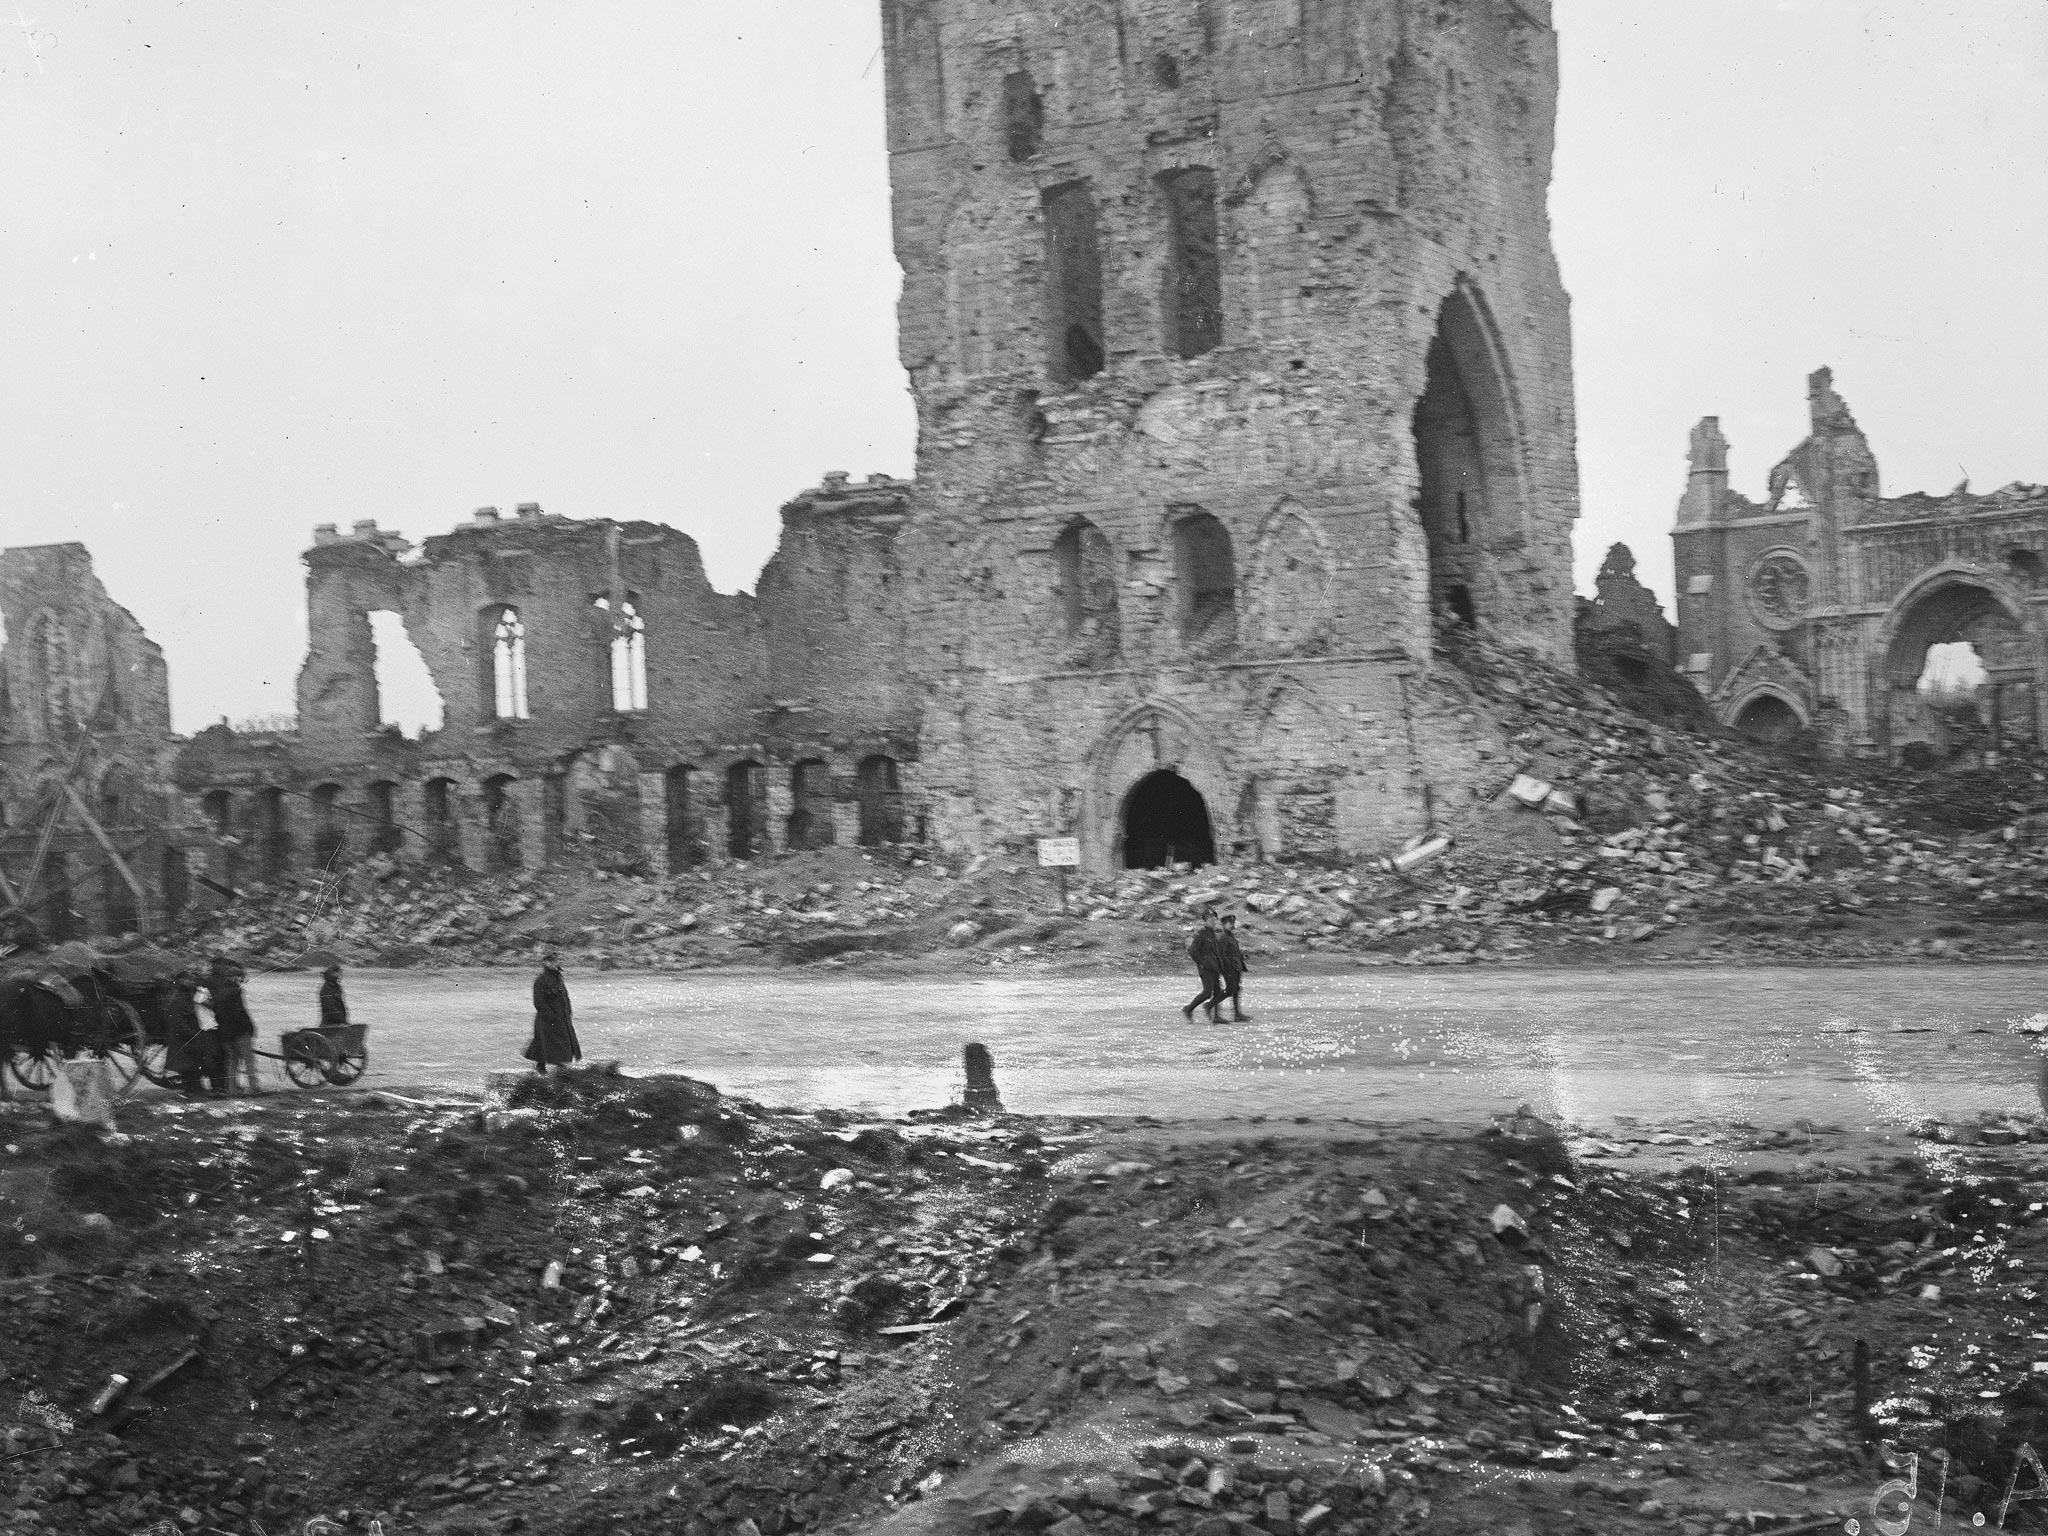 The ruins of the cloth hall and cathedral in Ypres during WWI